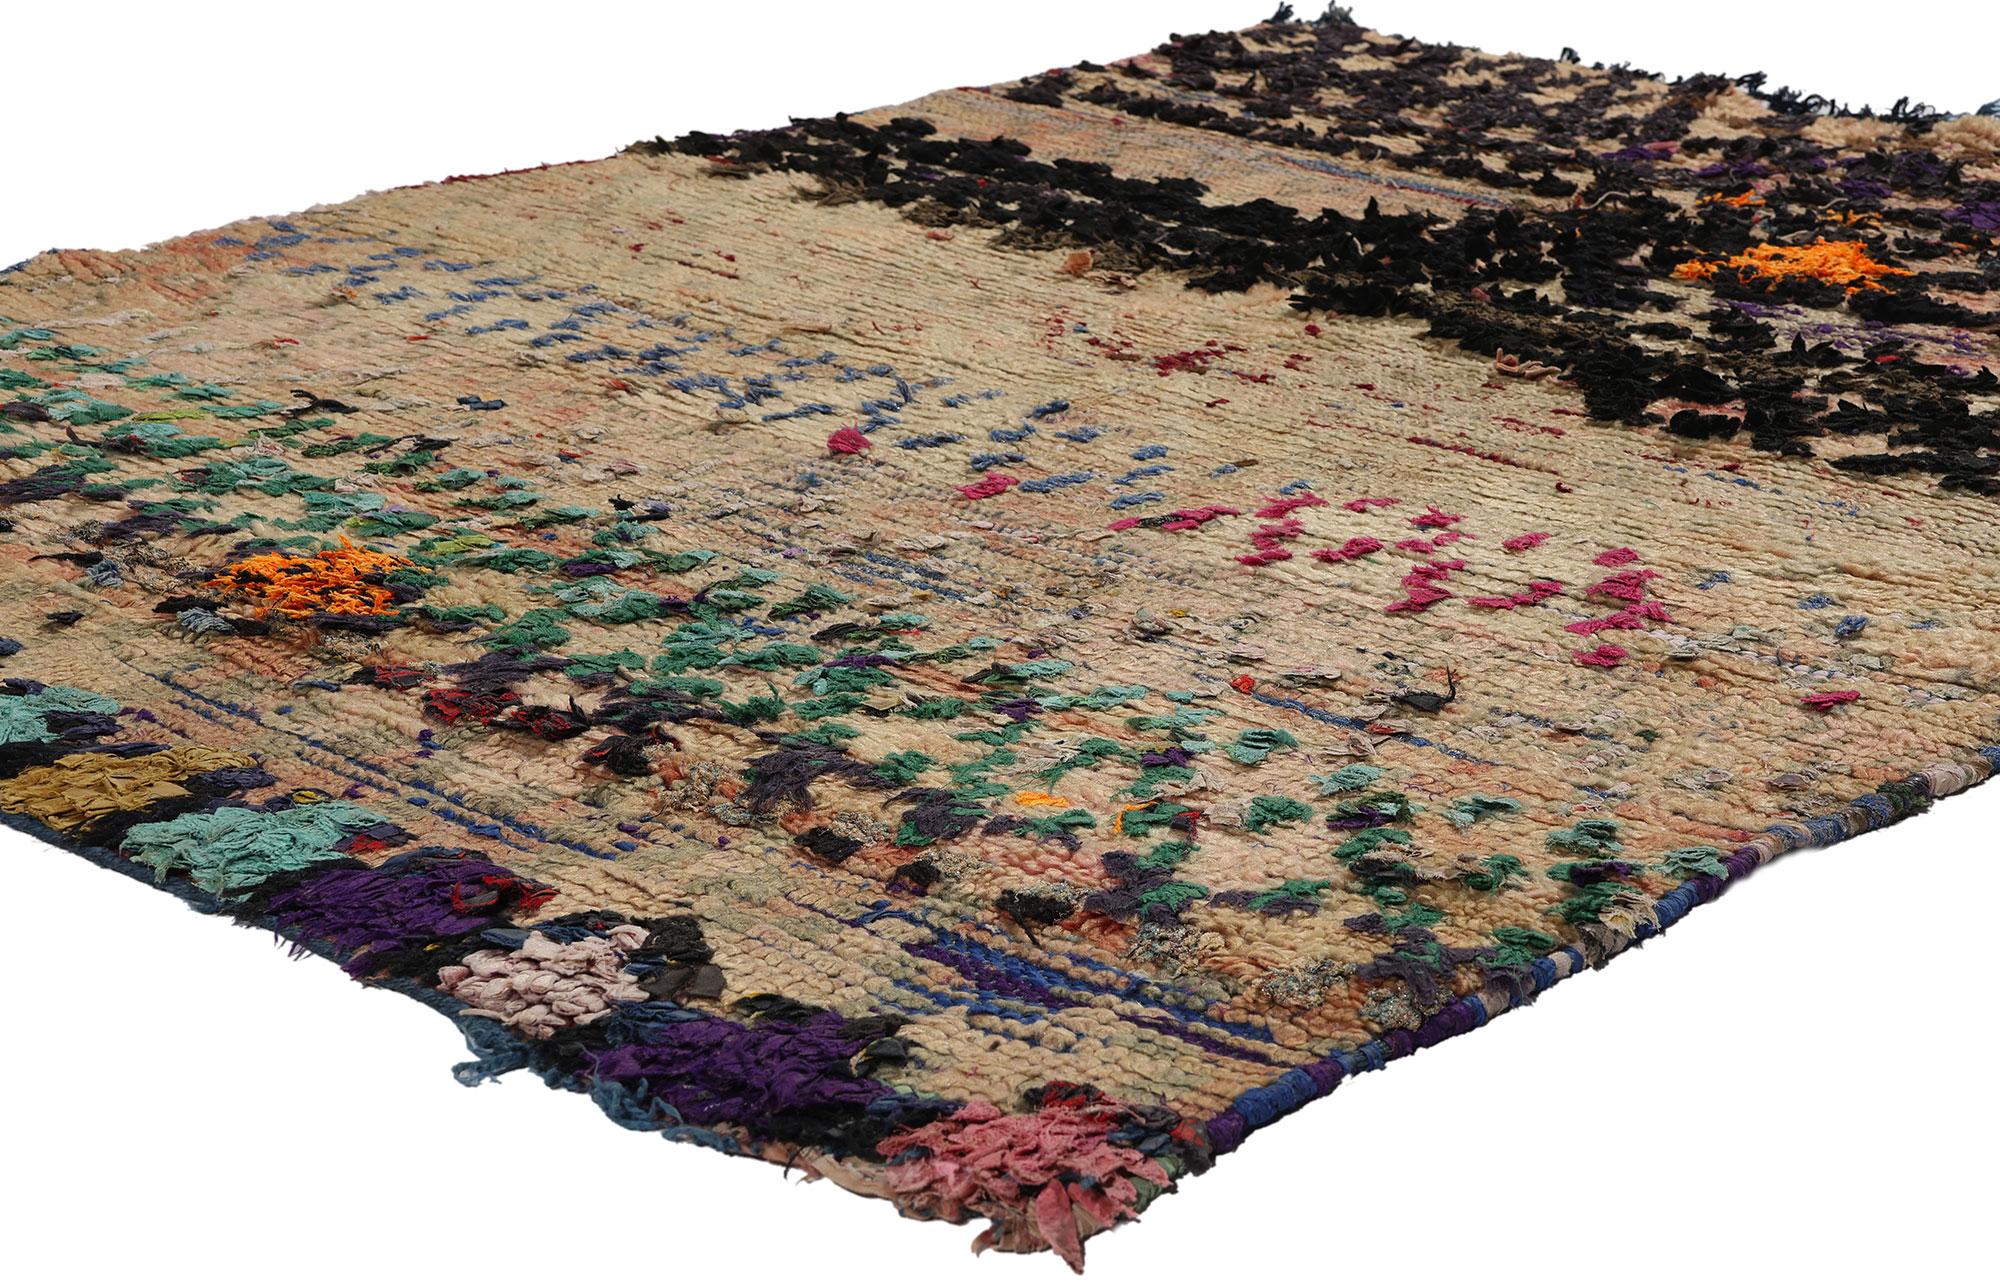 21794 Vintage Boucherouite Boujad Moroccan Rag Rug, 04'02 x 05'01. The Boujad rag rug, or Boujad Boucherouite rug, epitomizes sustainable craftsmanship, hailing from the Boujad region in the Khouribga province of Morocco. Meticulously crafted by